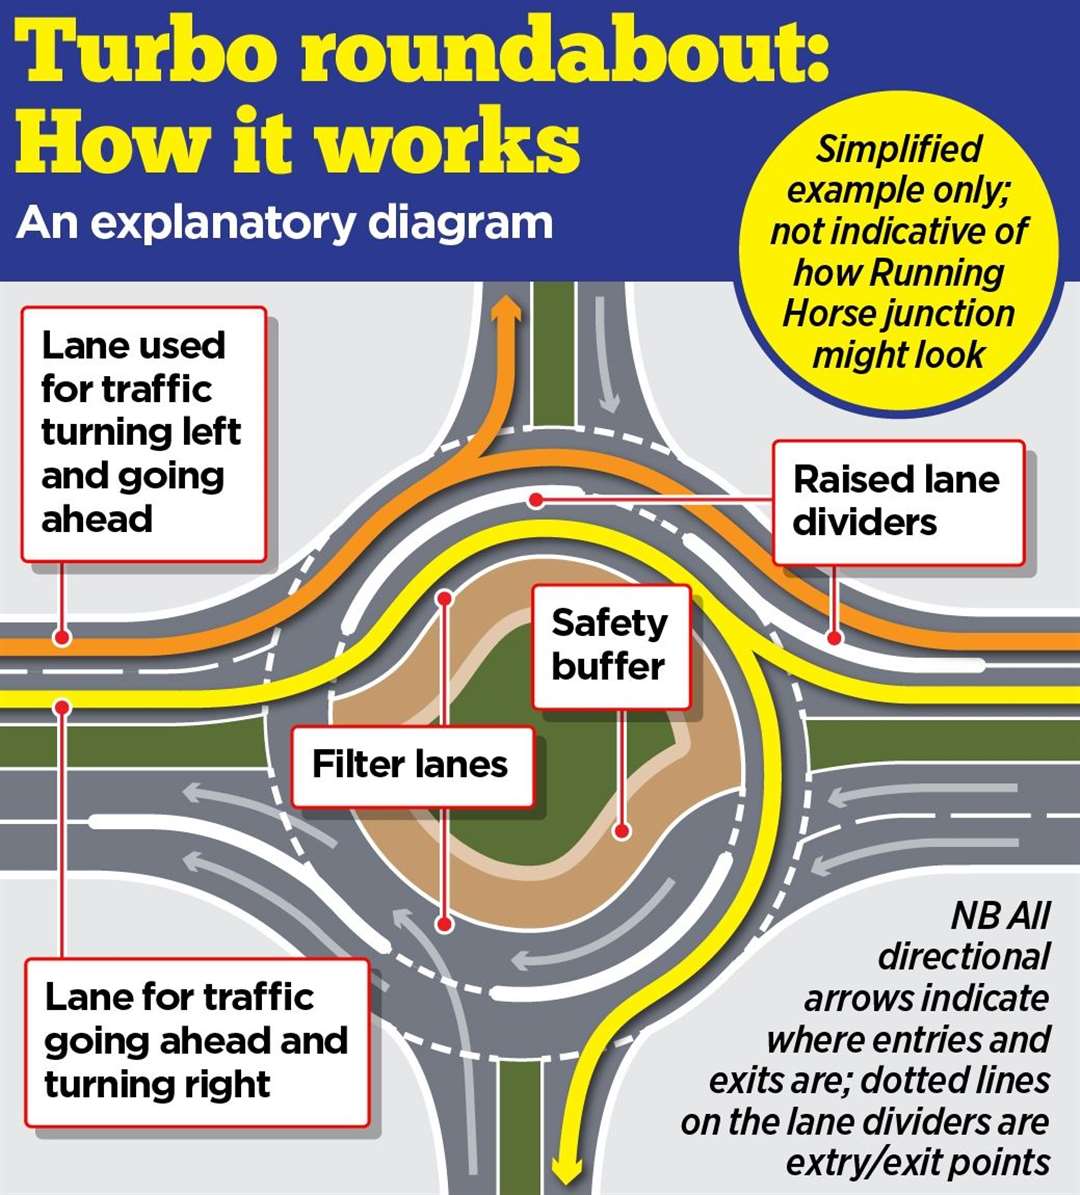 A diagram of how a turbo roundabout would work